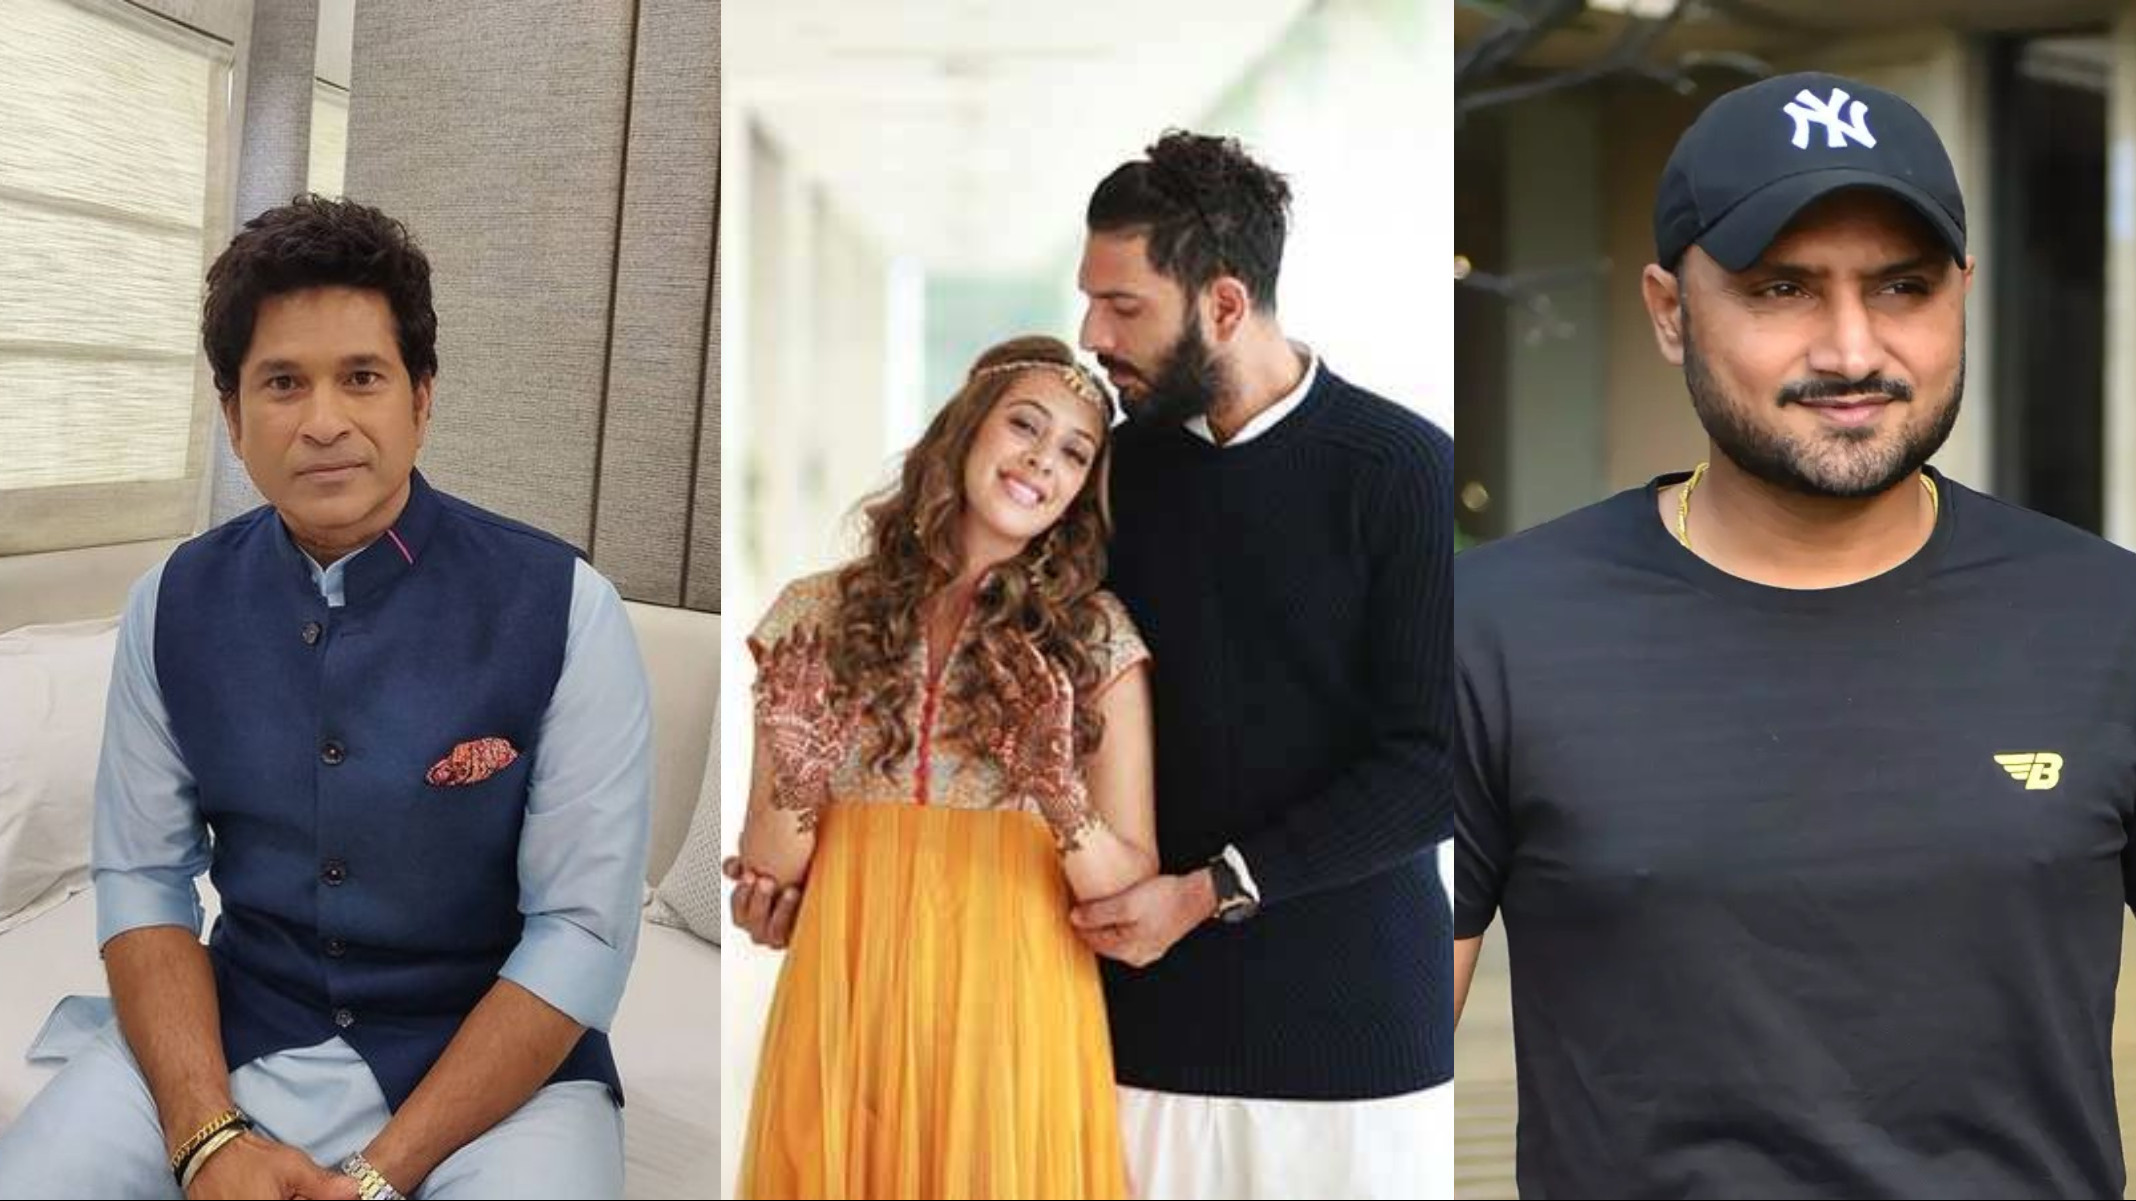 Yuvraj Singh's former India teammates wish him and his wife Hazel Keech on their first baby